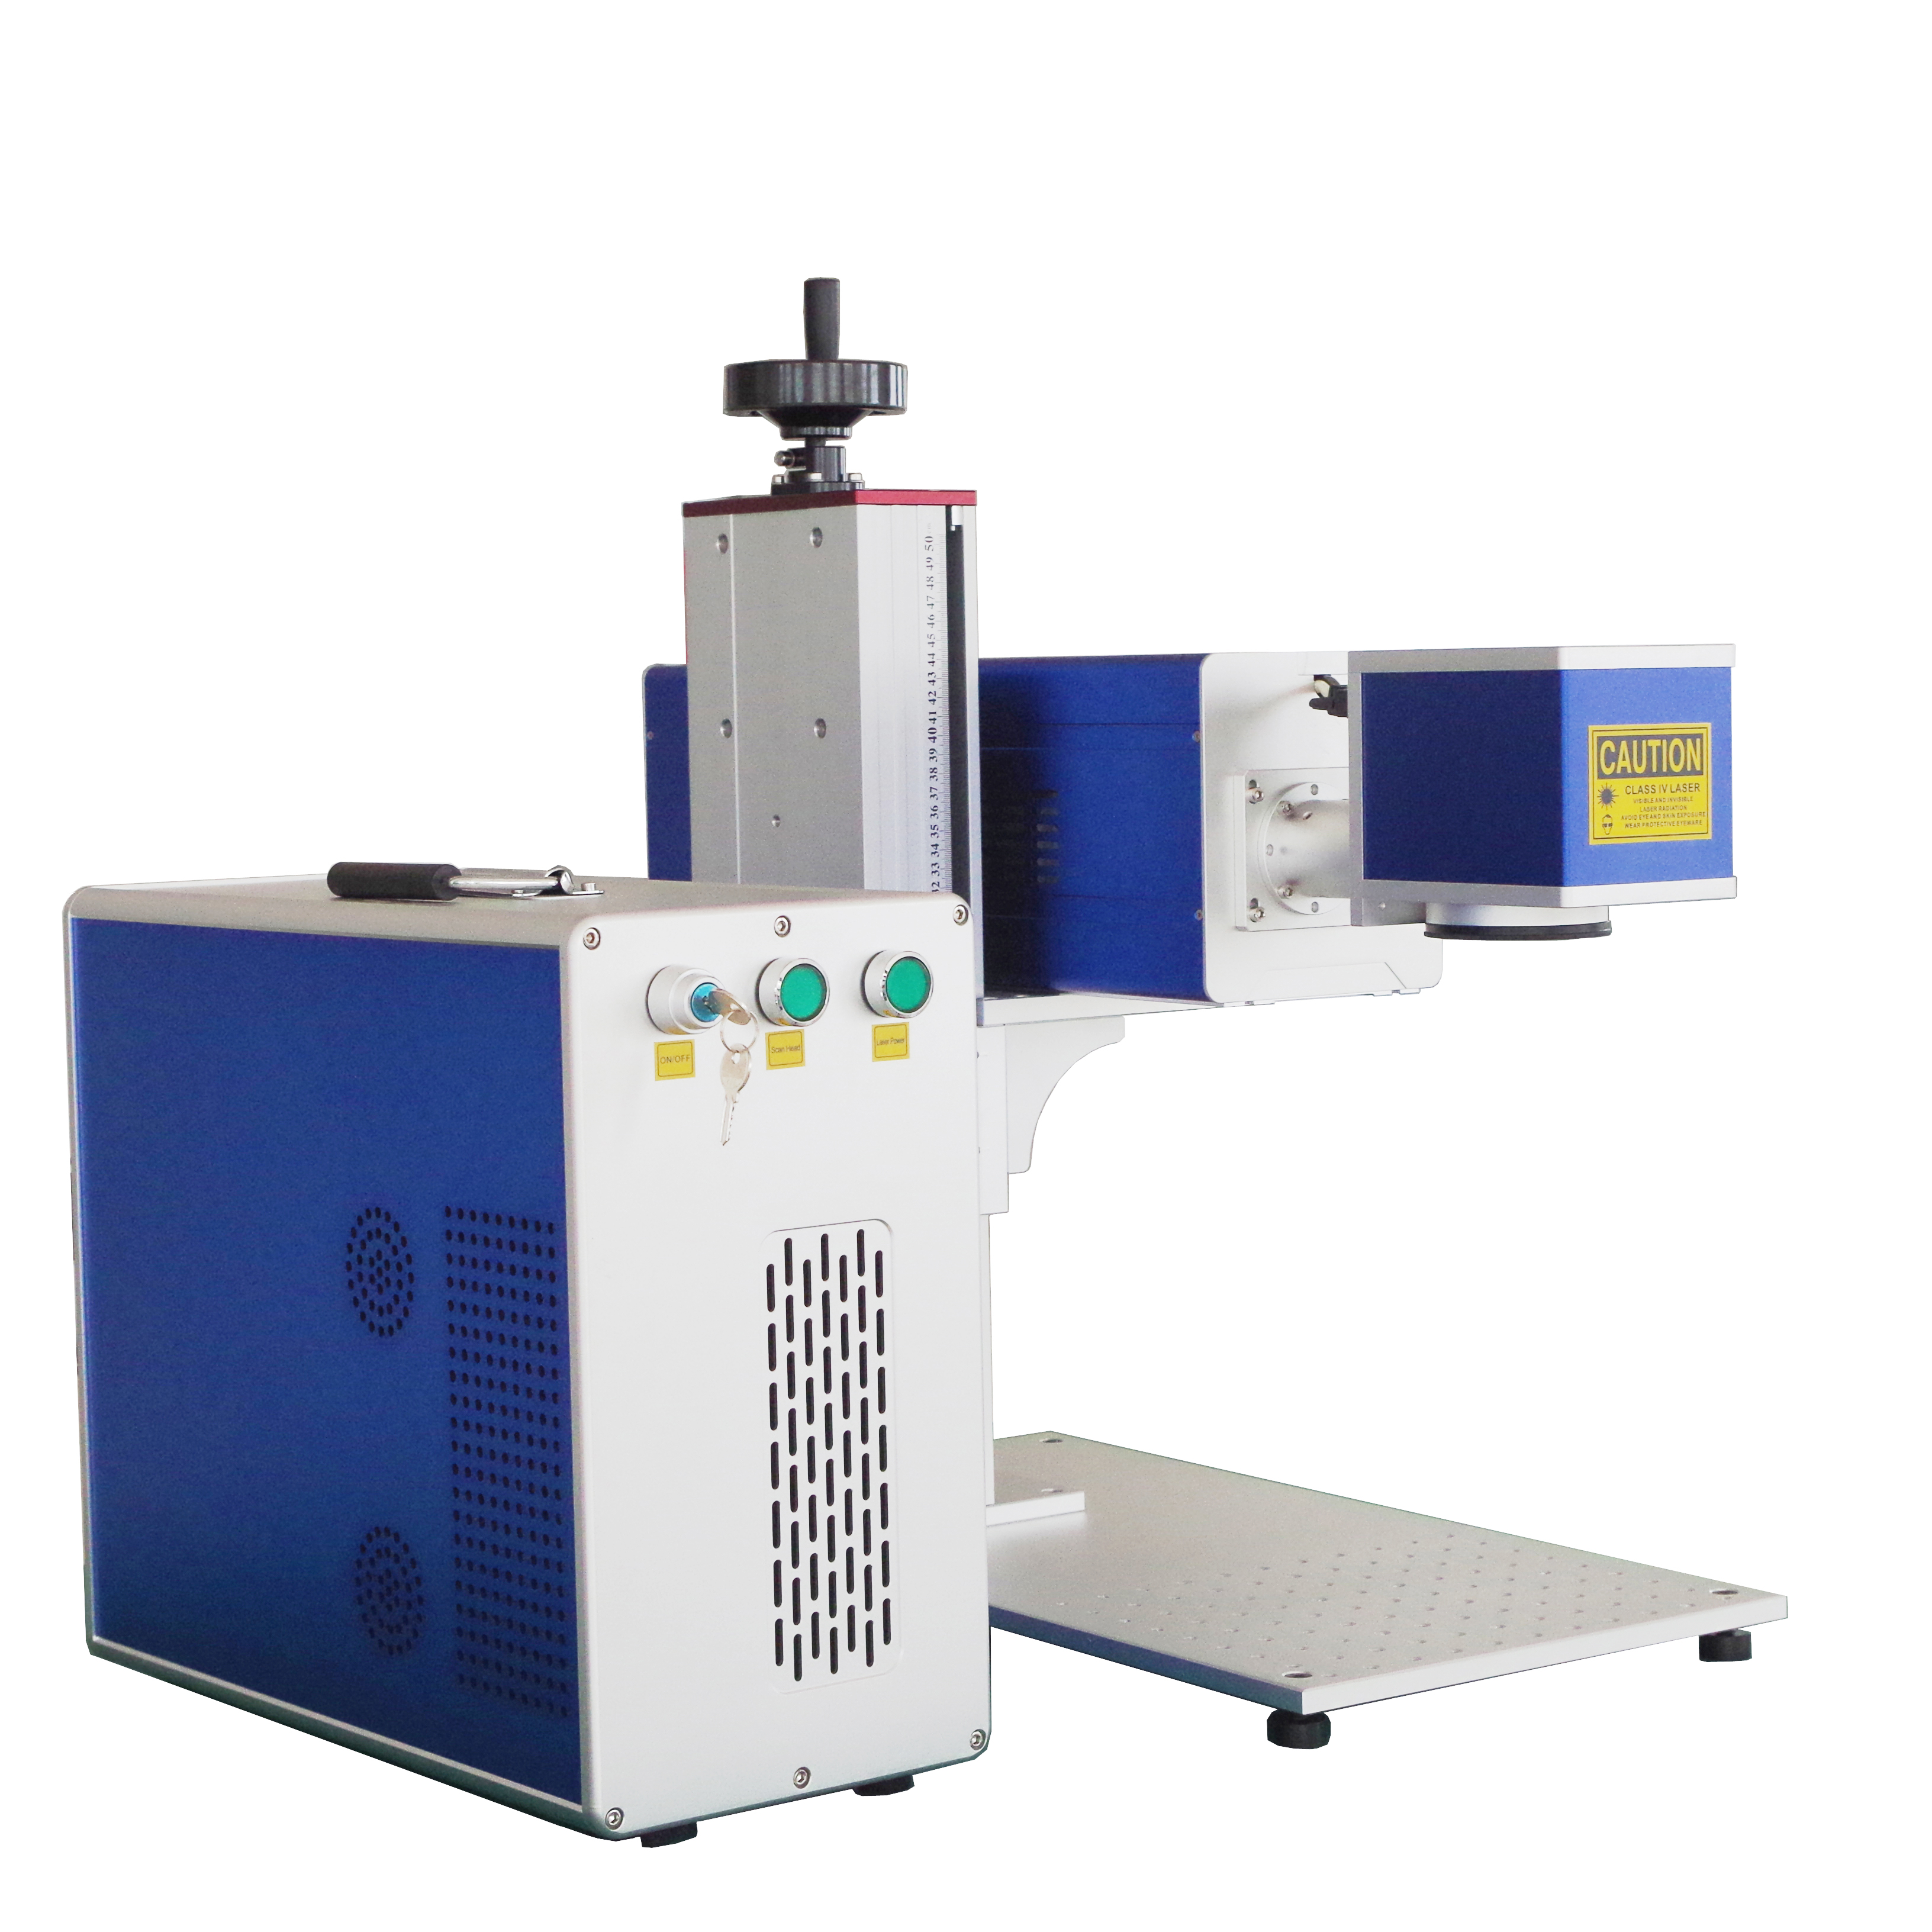 30W 55W 60W Galvo US Coherent Synrad Laser Marking Machine CO2 Laser Printing/Engraver/Marker